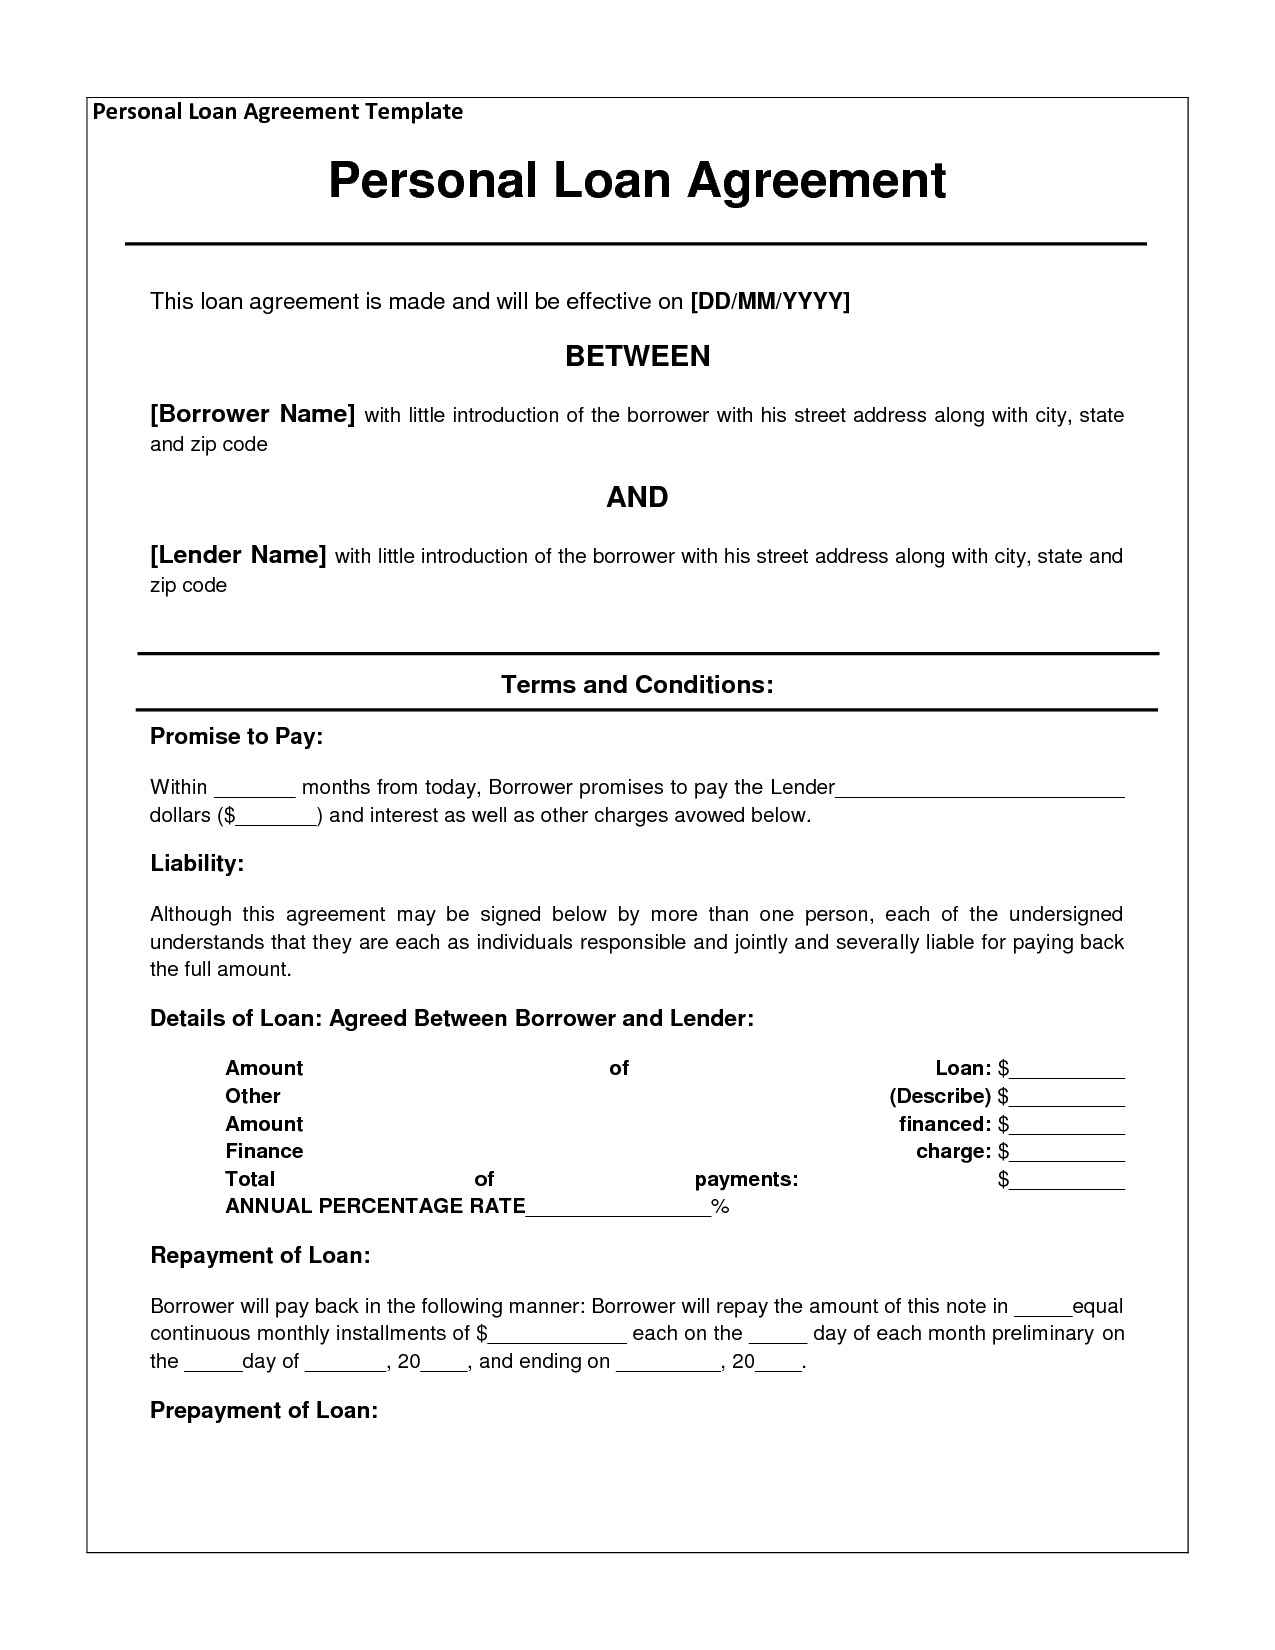 Free personal loan agreement form template $1000 Approved in 2 